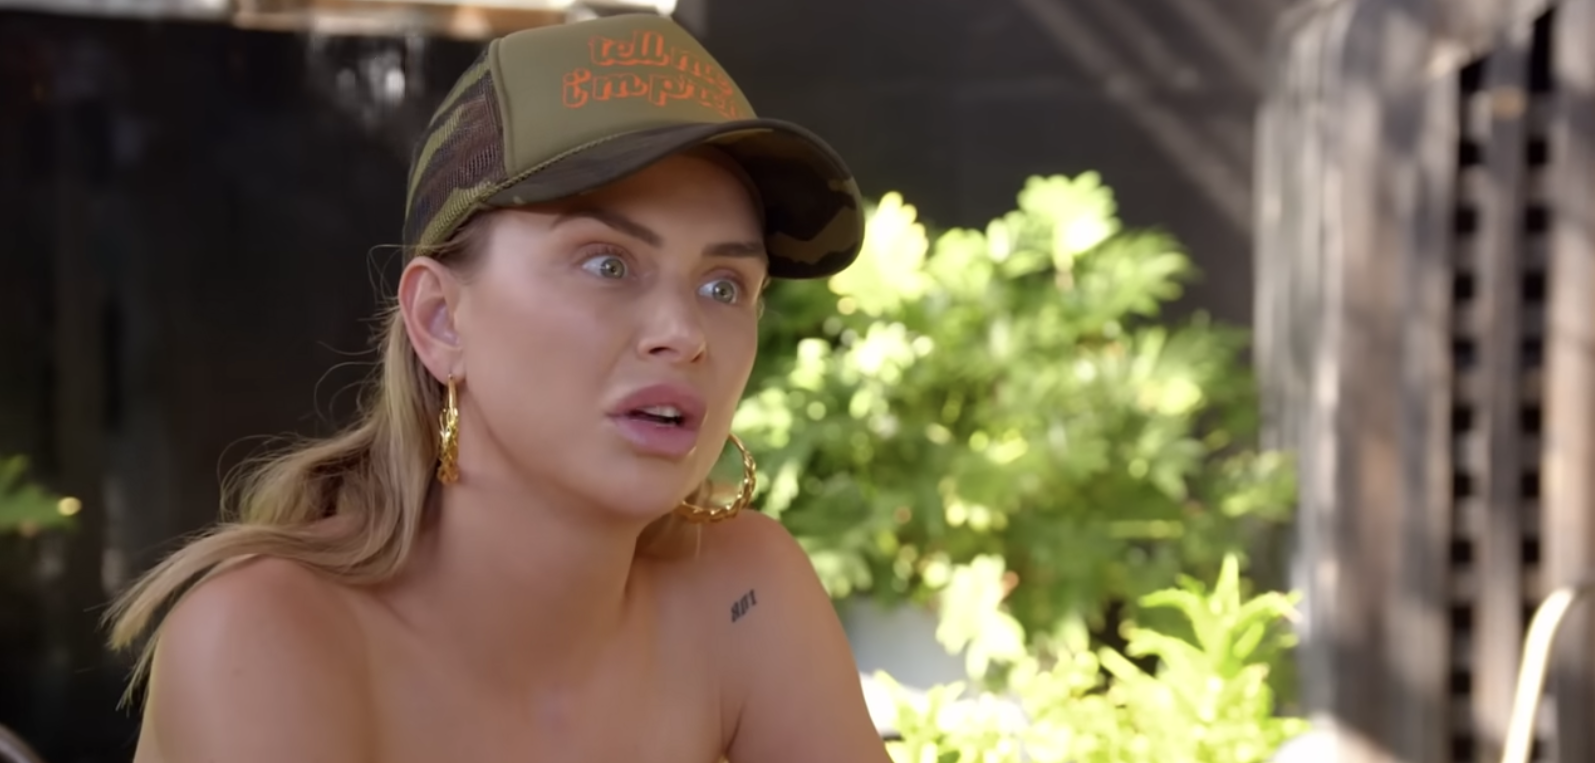 Lala Kent 'appalled' by Tom Sandoval's tiger photo, Entertainment